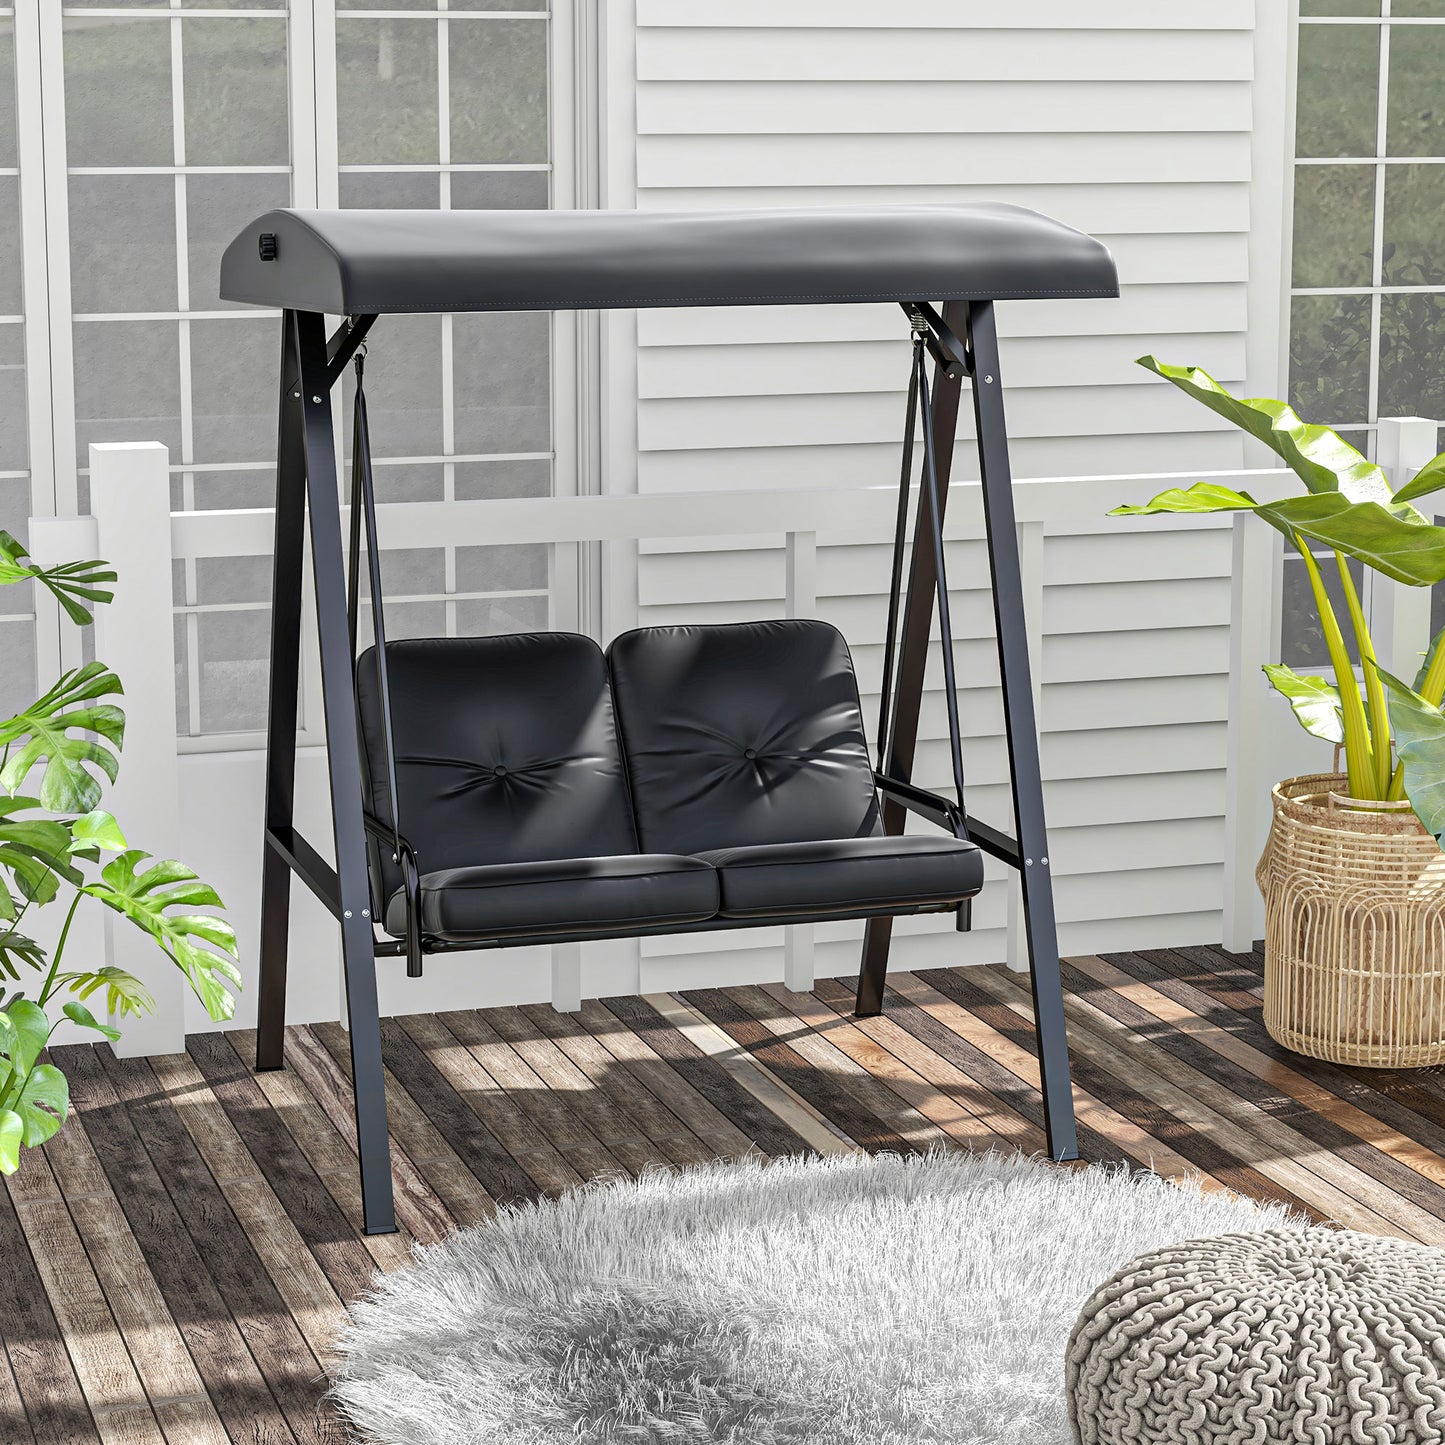 Outsunny Two-Seater Garden Swing Bench, with Adjustable Canopy - Black